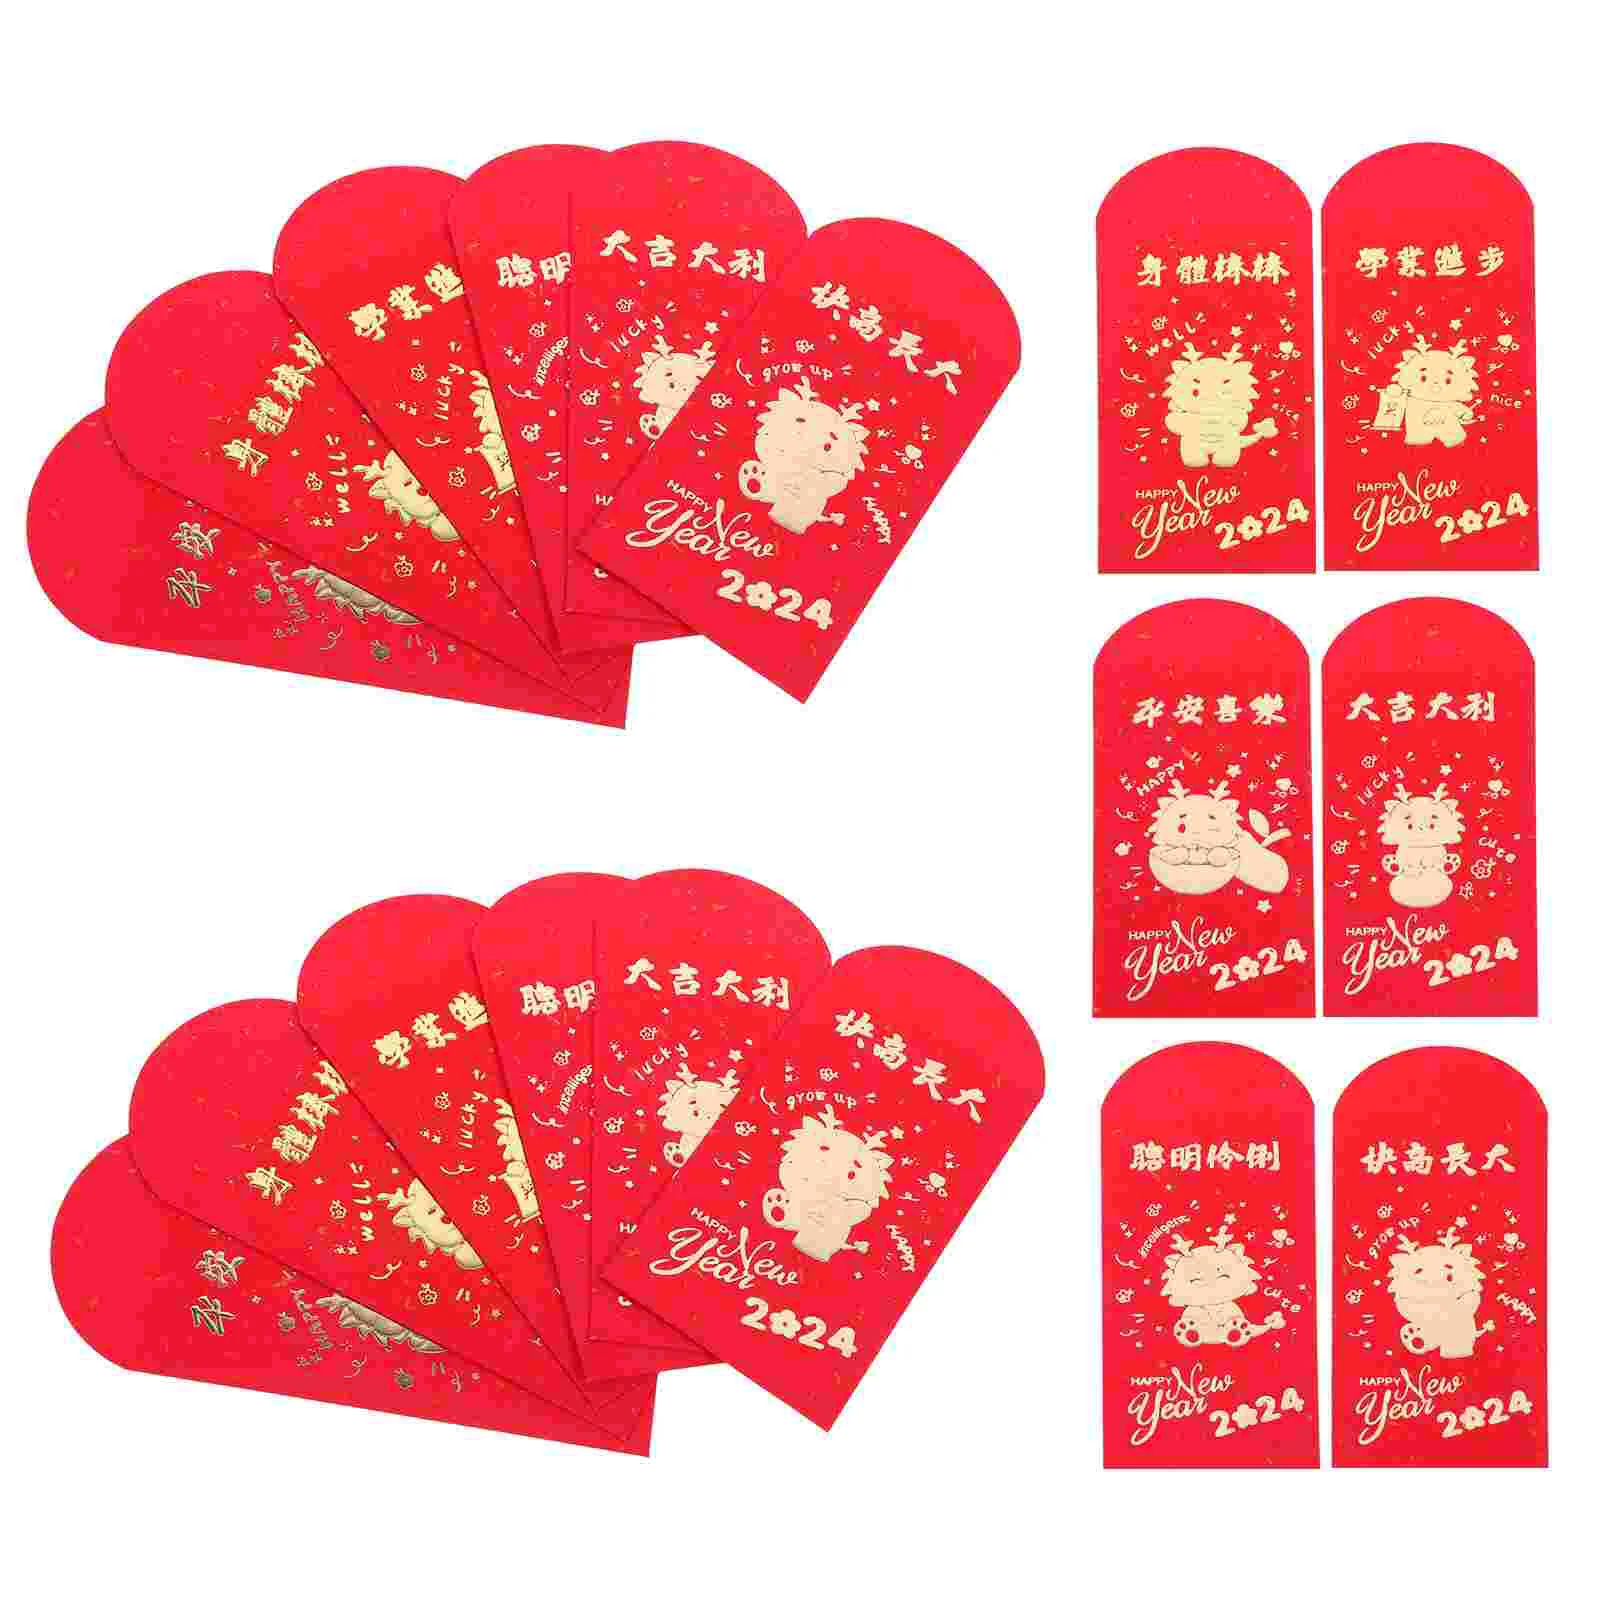 

18pcs Chinese Lunar Year Red Envelopes Traditional Red Envelopes Lucky Money Holder Bags